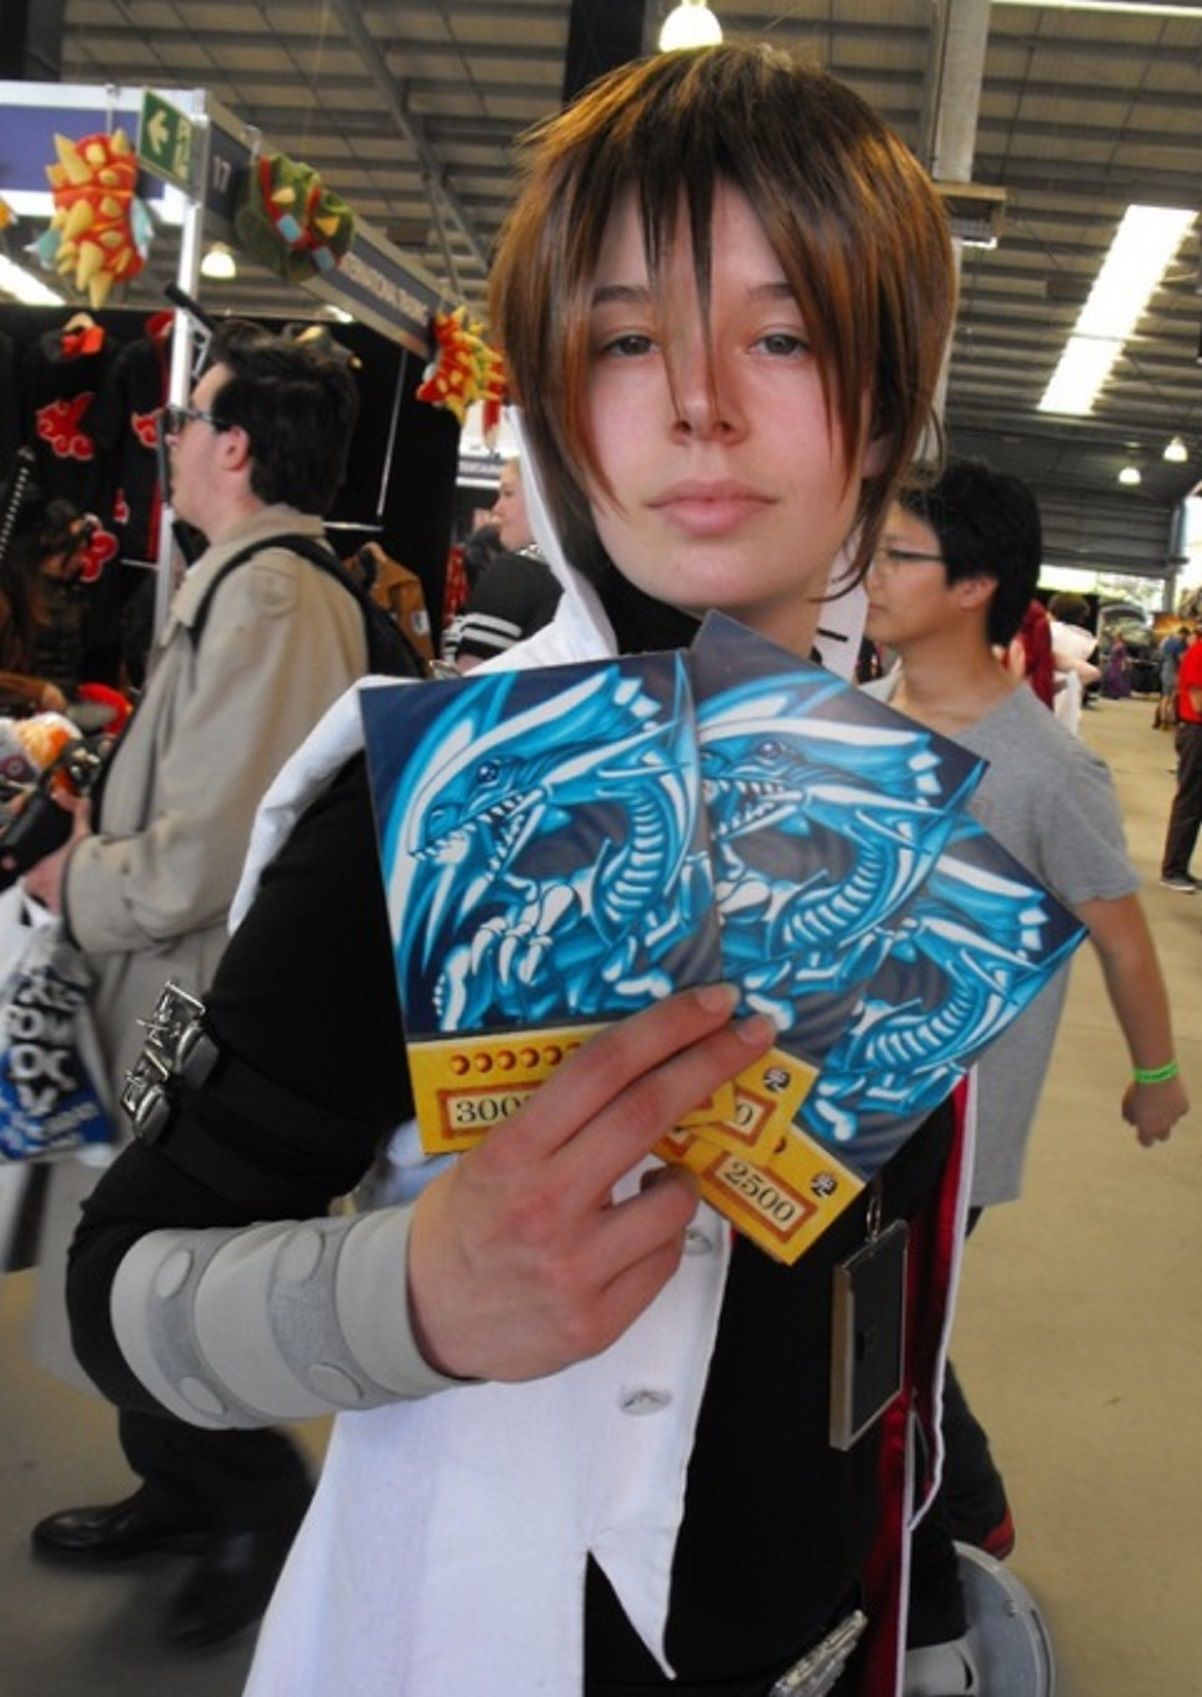 10 Seto Kaiba Cosplay Pictures That We Love.